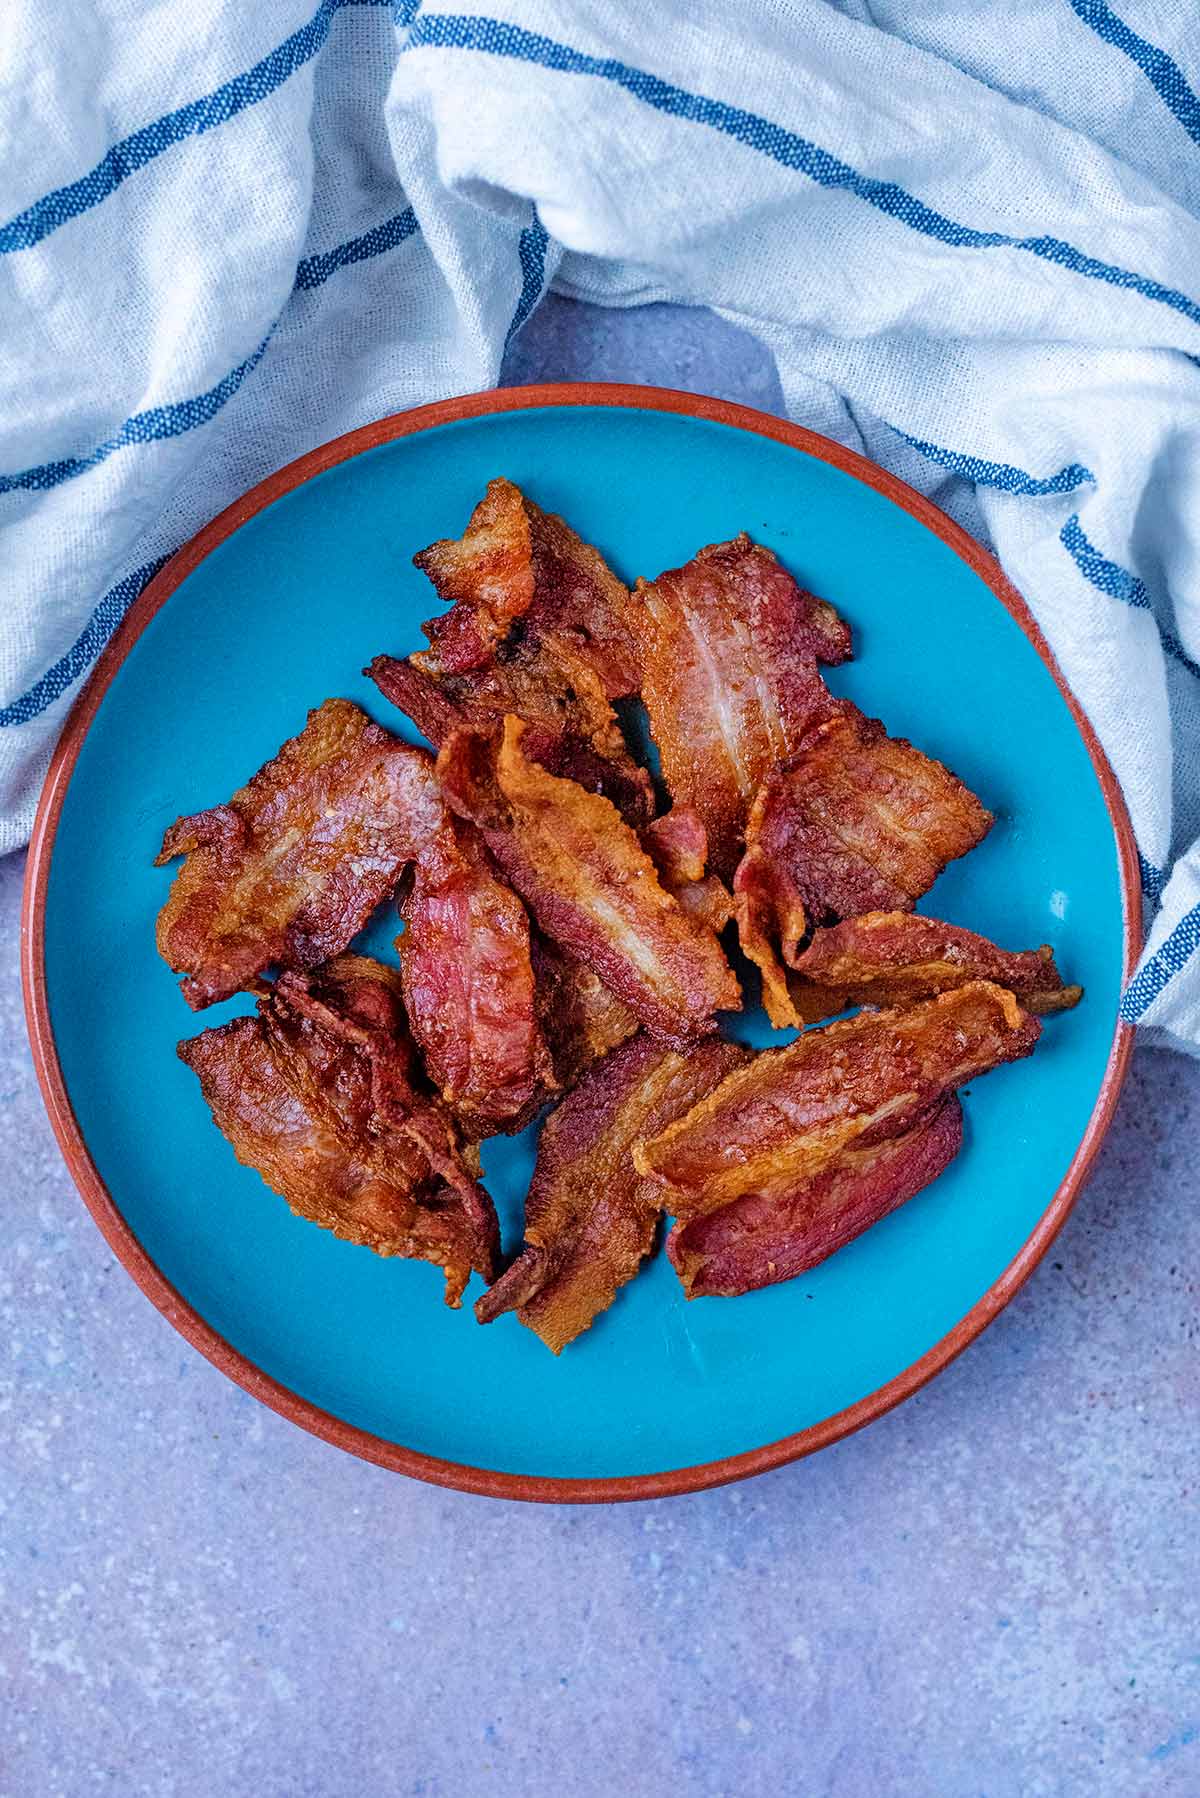 A plate of cooked bacon next to a striped towel.